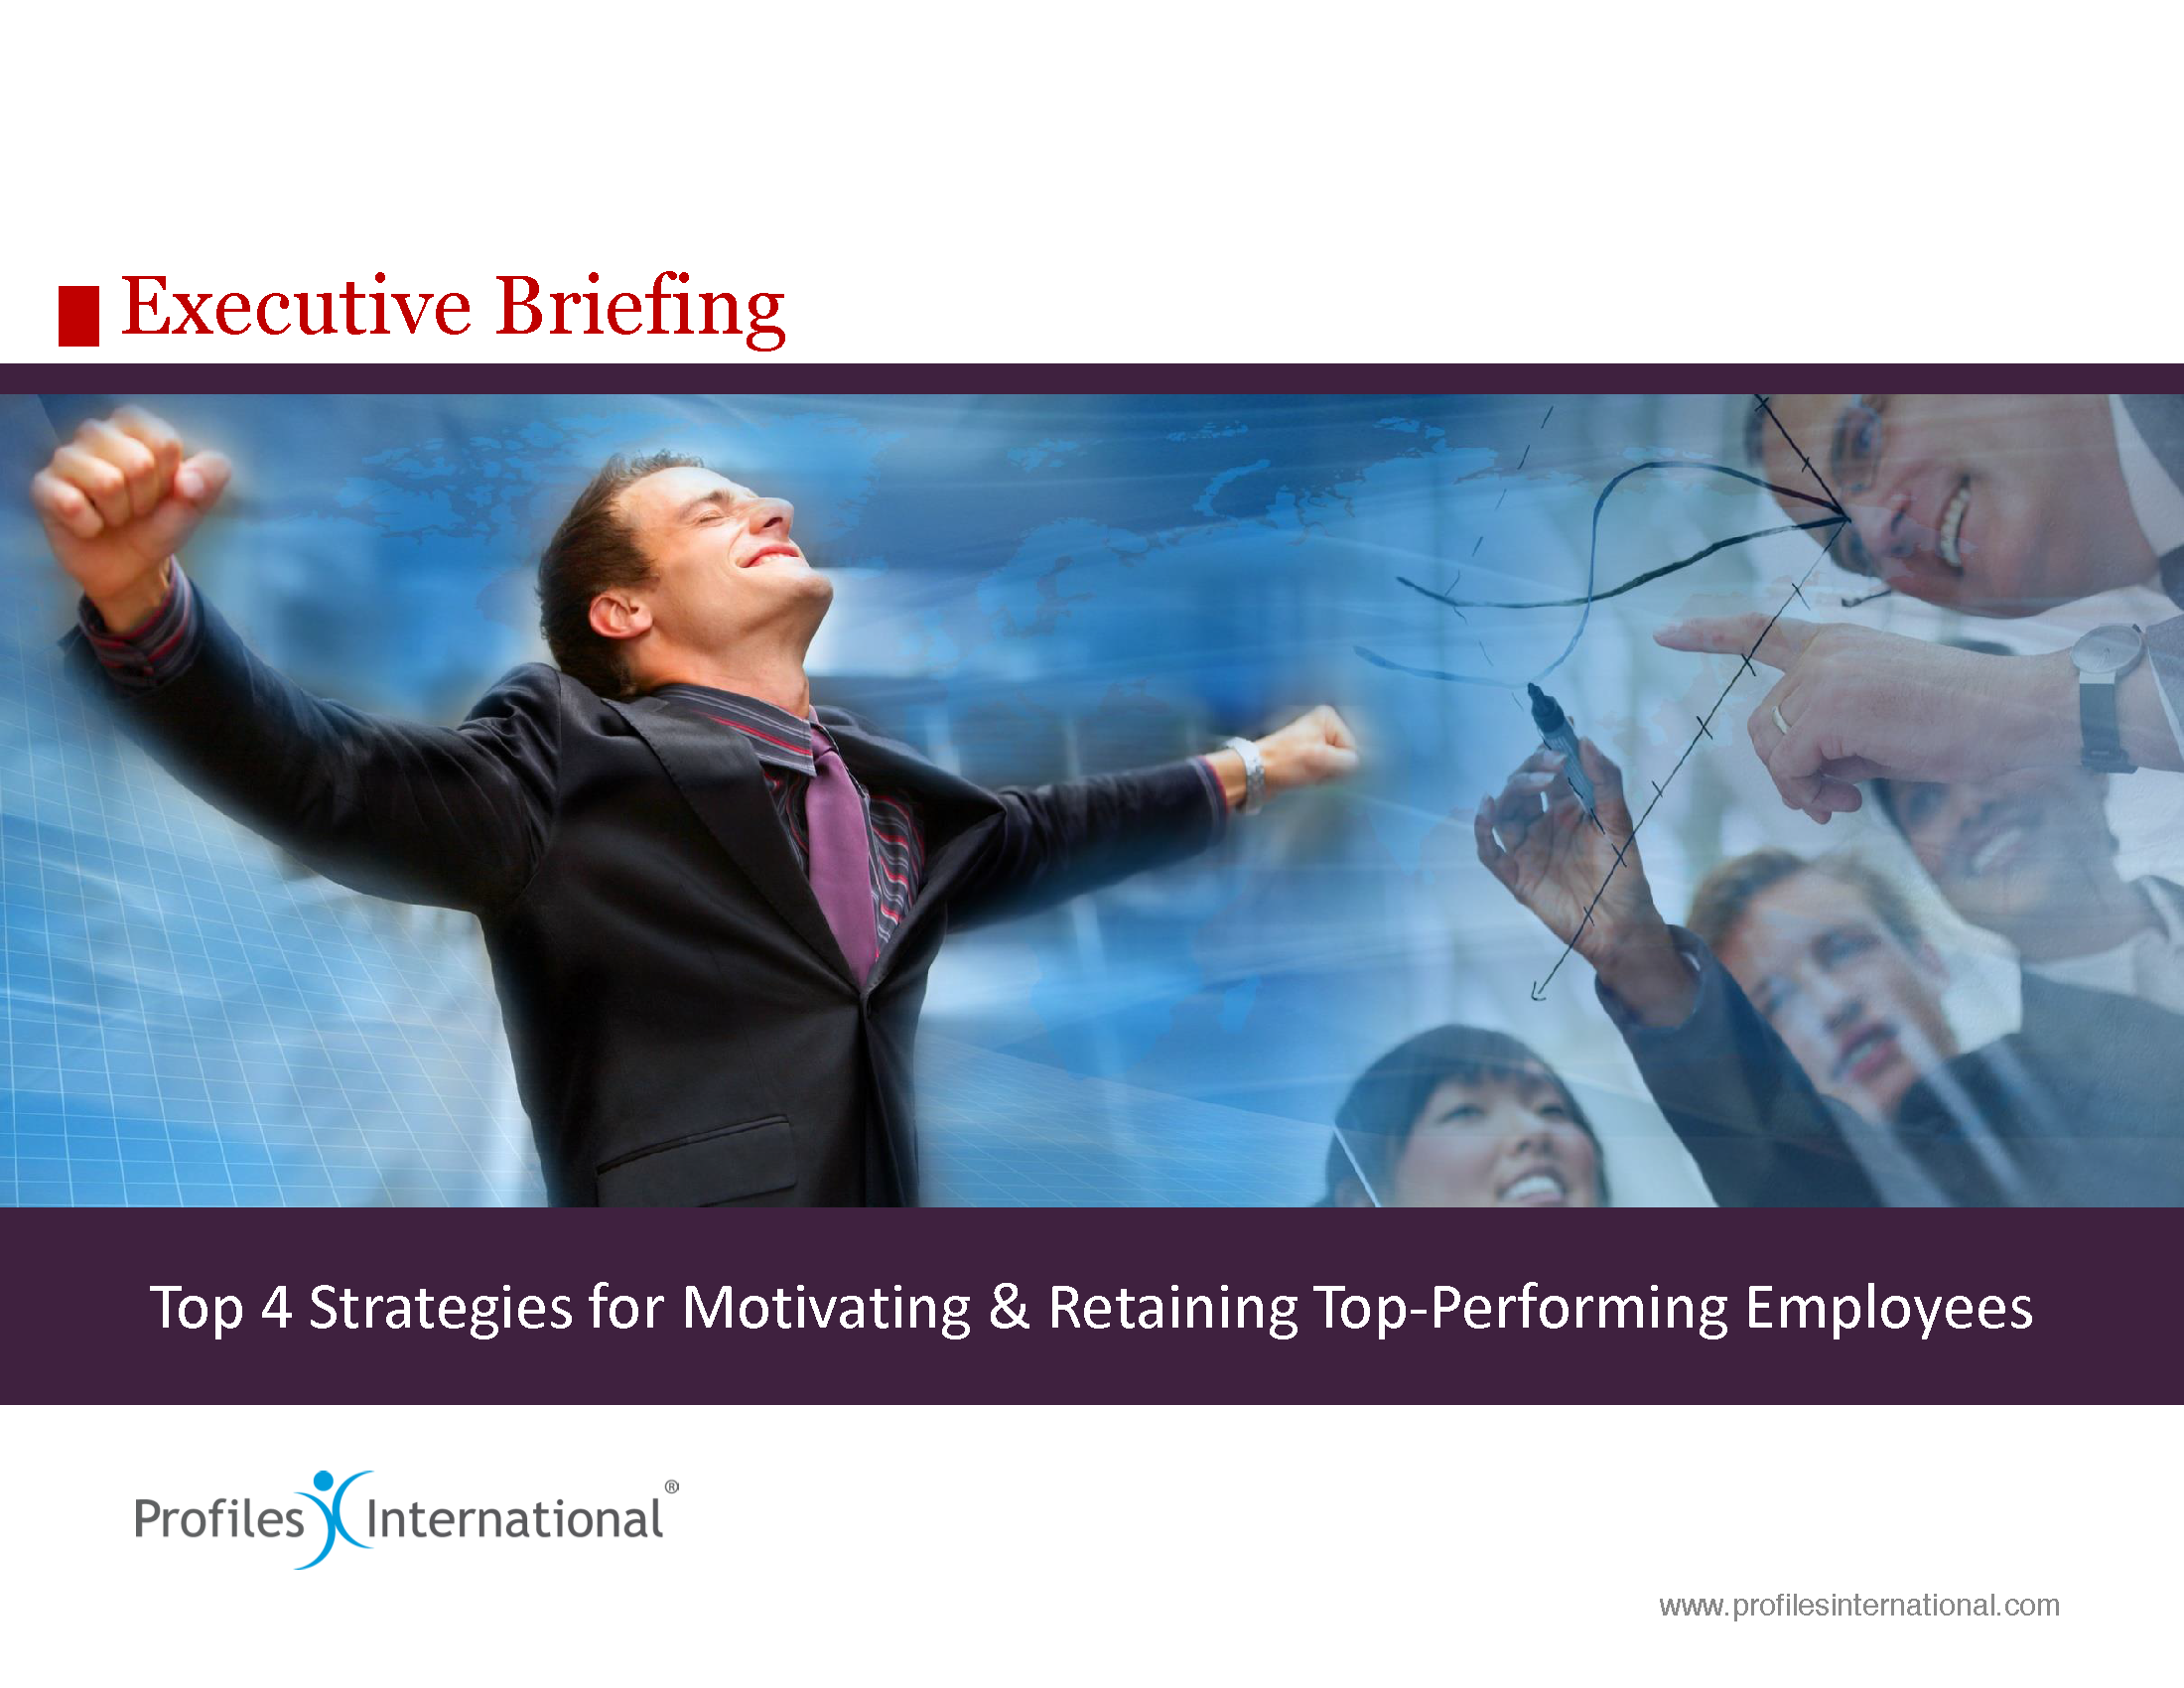 18-Top 4 Strategies for Motivating and Retaining Employees